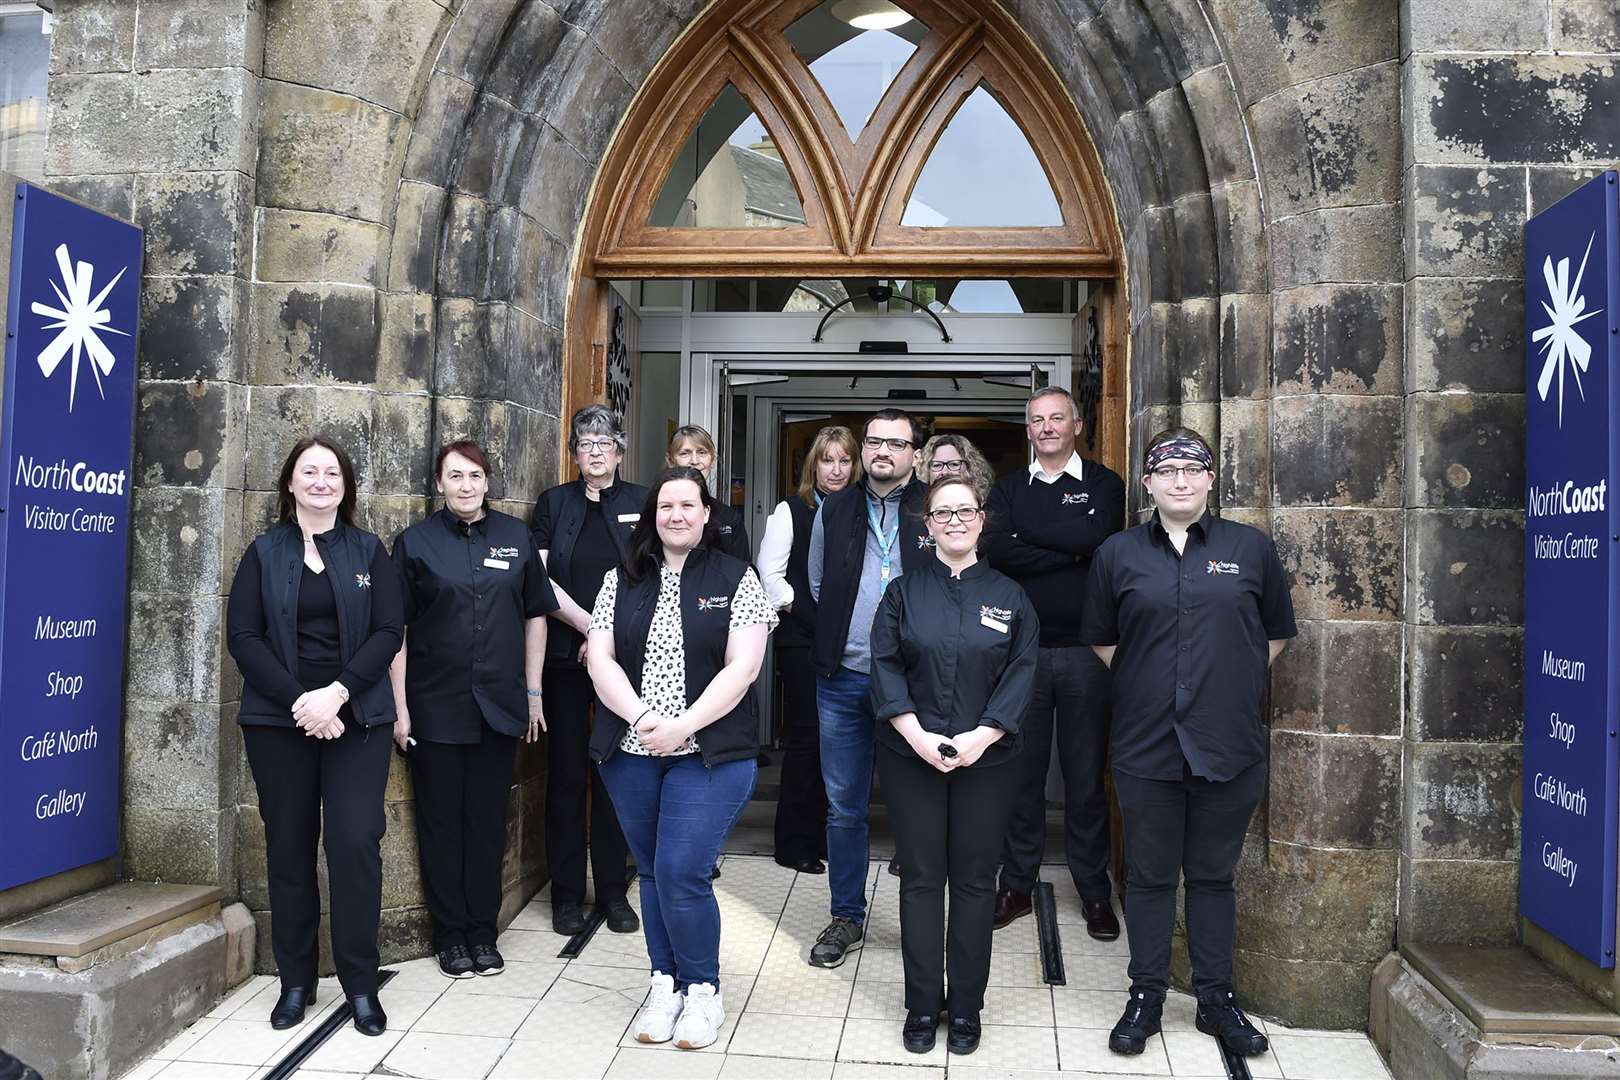 John West (back right) with some of the High Life Highland staff who will help with running the North Coast Visitor Centre. Picture: Mel Roger